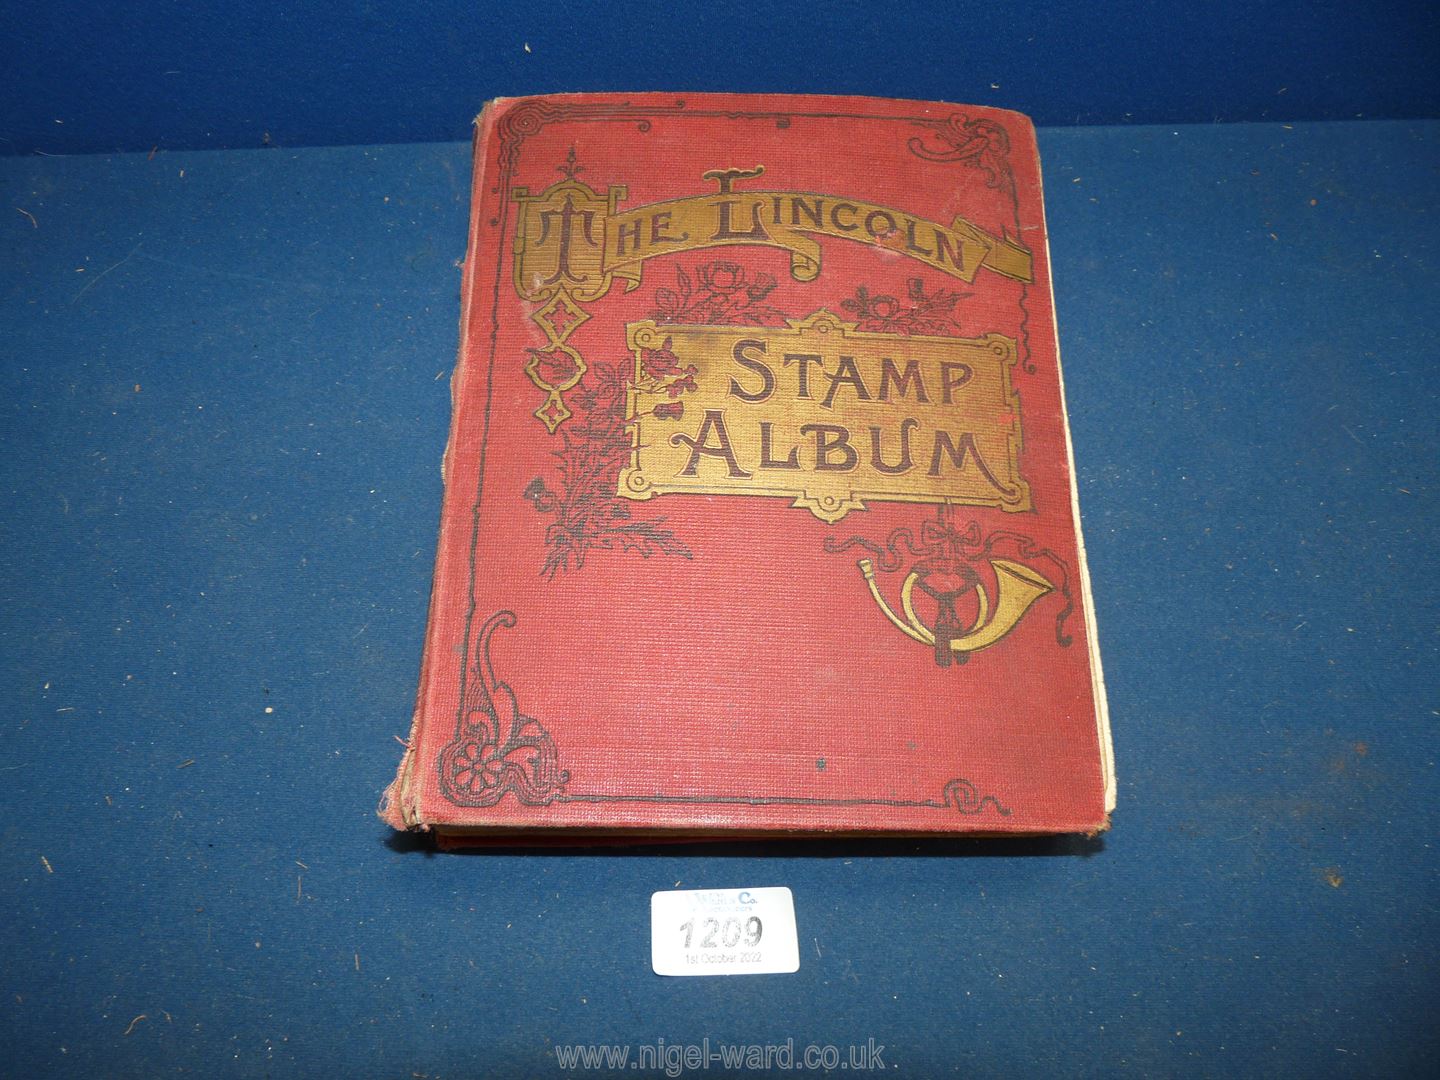 A 'The Lincoln' Stamp album with Great British and foreign stamps, etc.